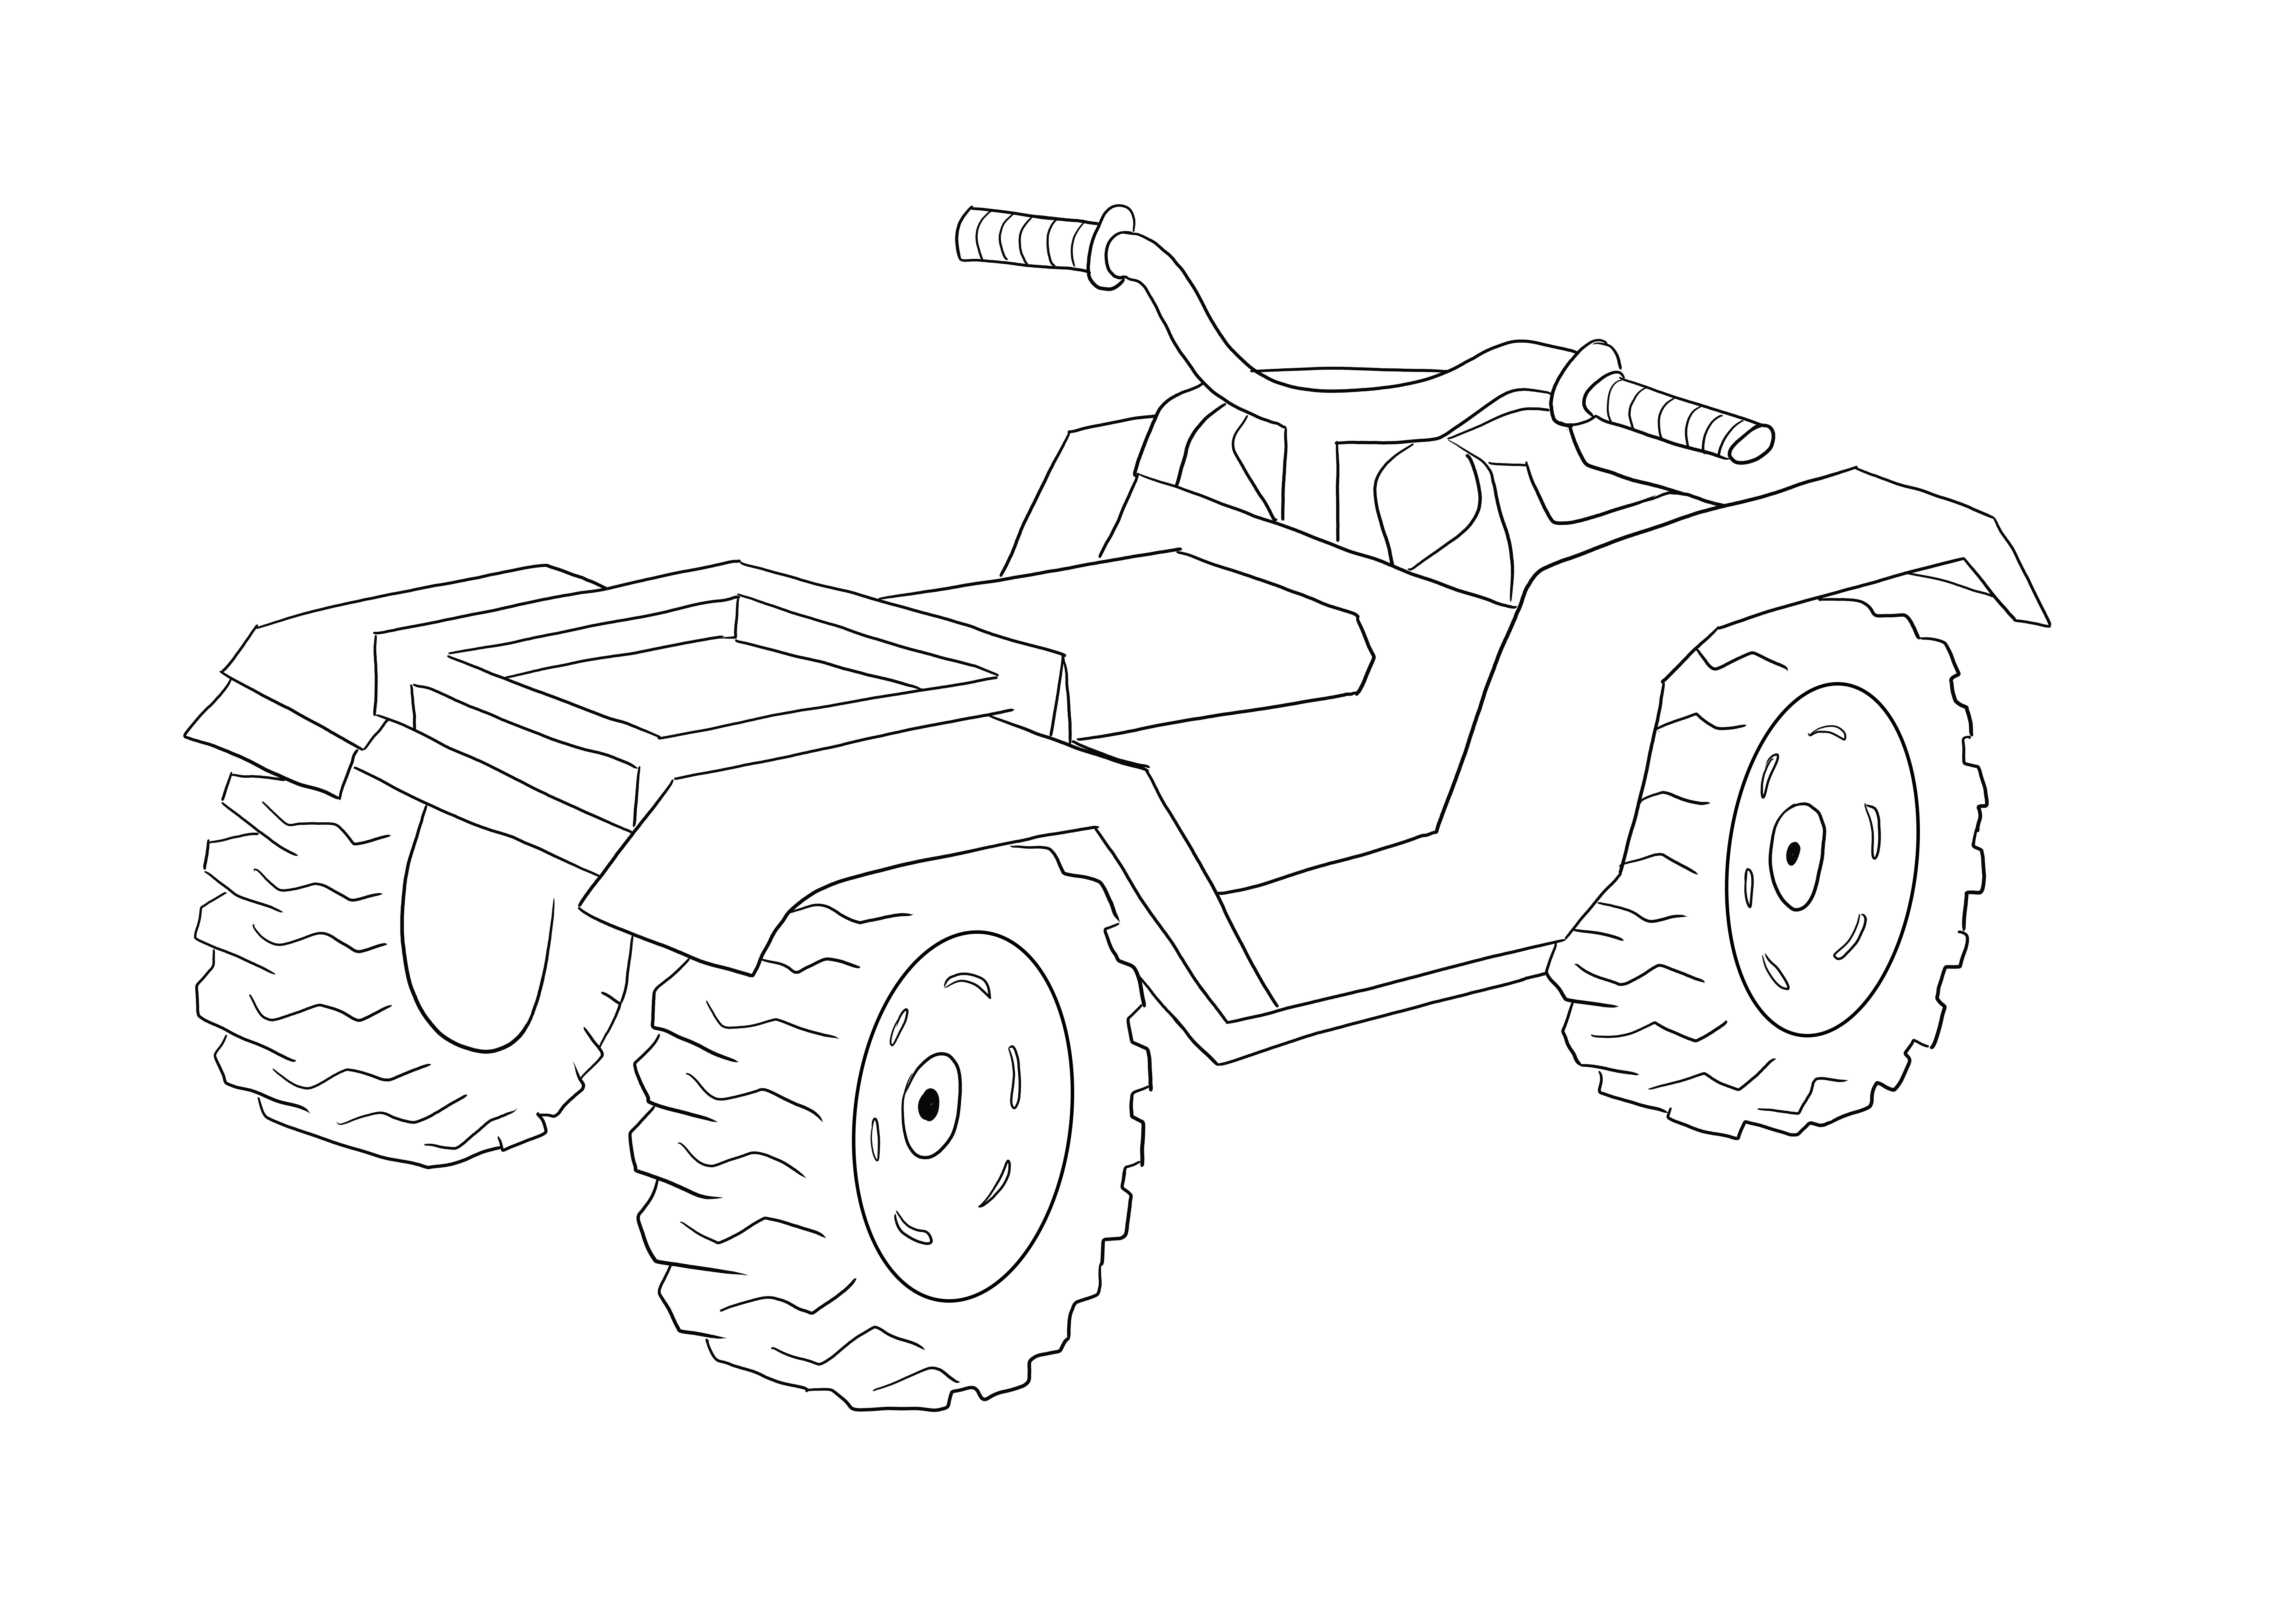 ATV-off-road vehicle for printing and coloring sheets for car lovers